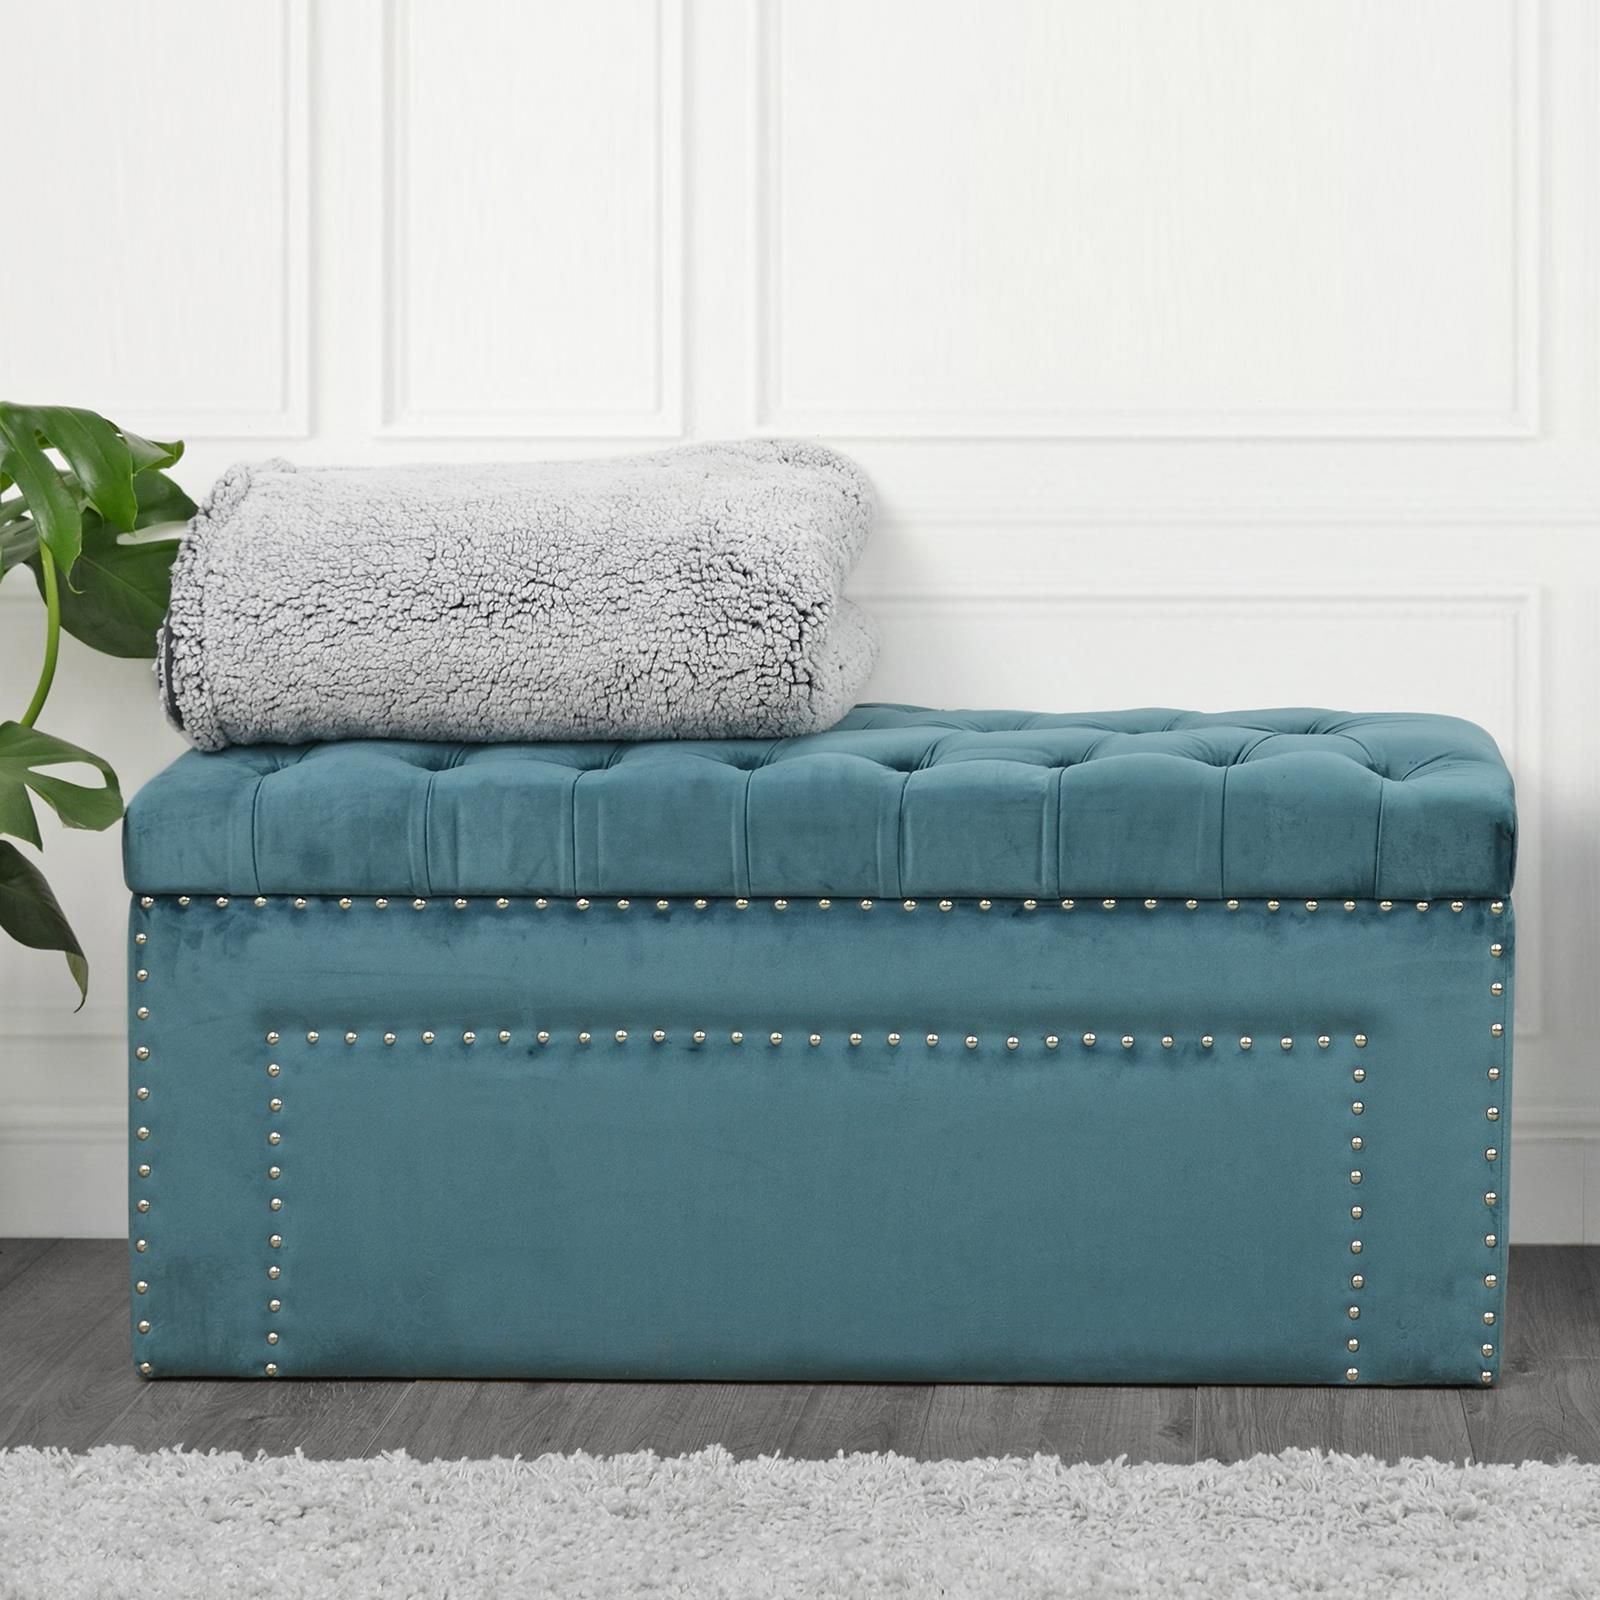 Storage Ottoman Large Blanket Box Padded Velvet Seat Bench Silver Studs Intended For Trendy Silver Faux Leather Ottomans With Pull Tab (View 6 of 10)